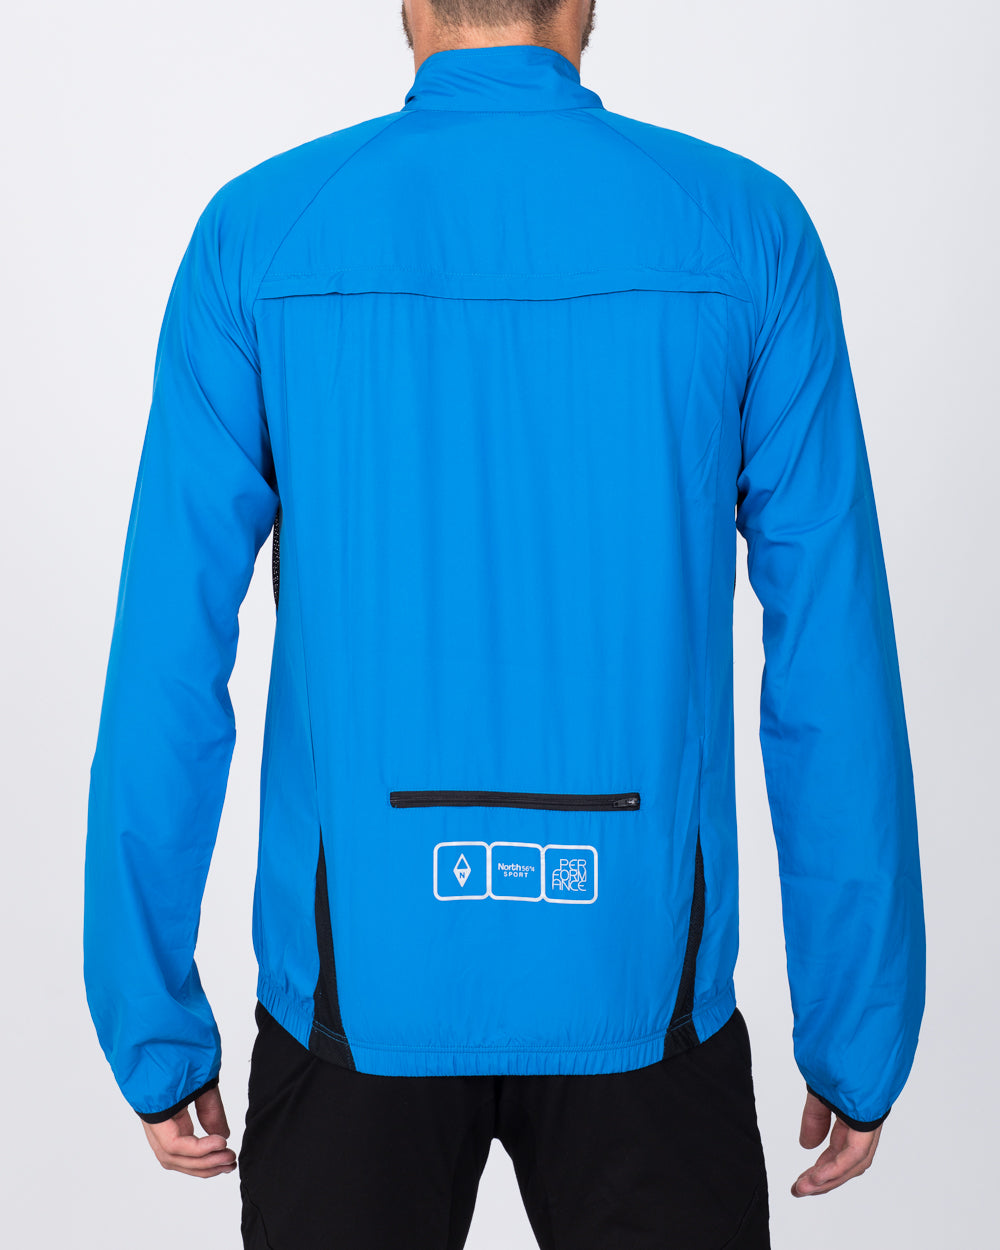 North 56 Lightweight Cycling Jacket (blue)